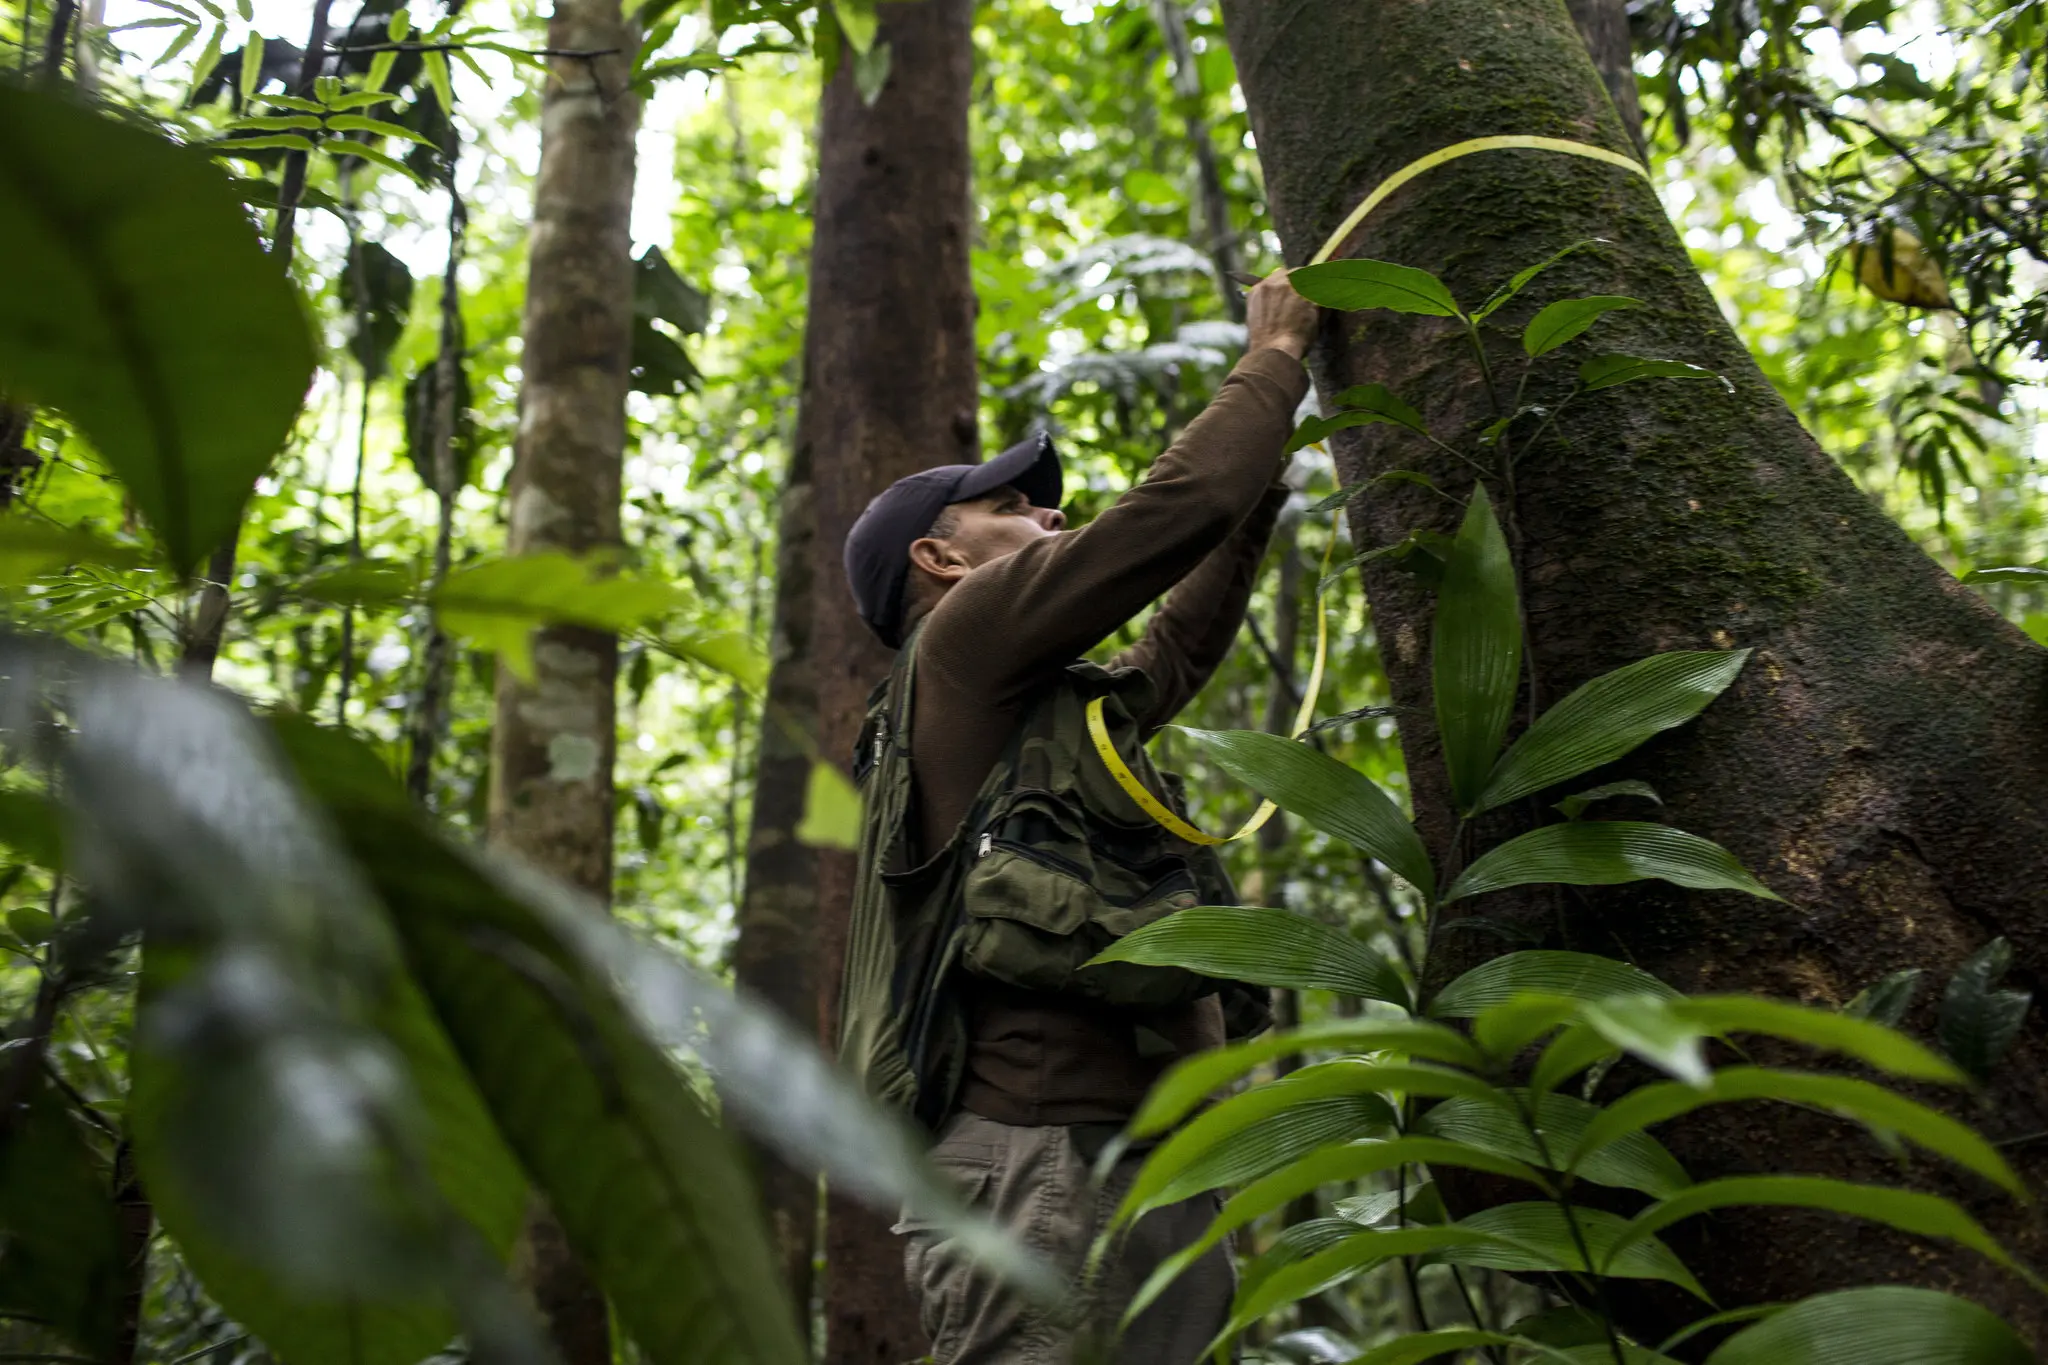 Researcher measuring tree trunk in Costa Rican forest, near Vayu Retreat Villas, emphasizing sustainable tourism in Costa Rica.